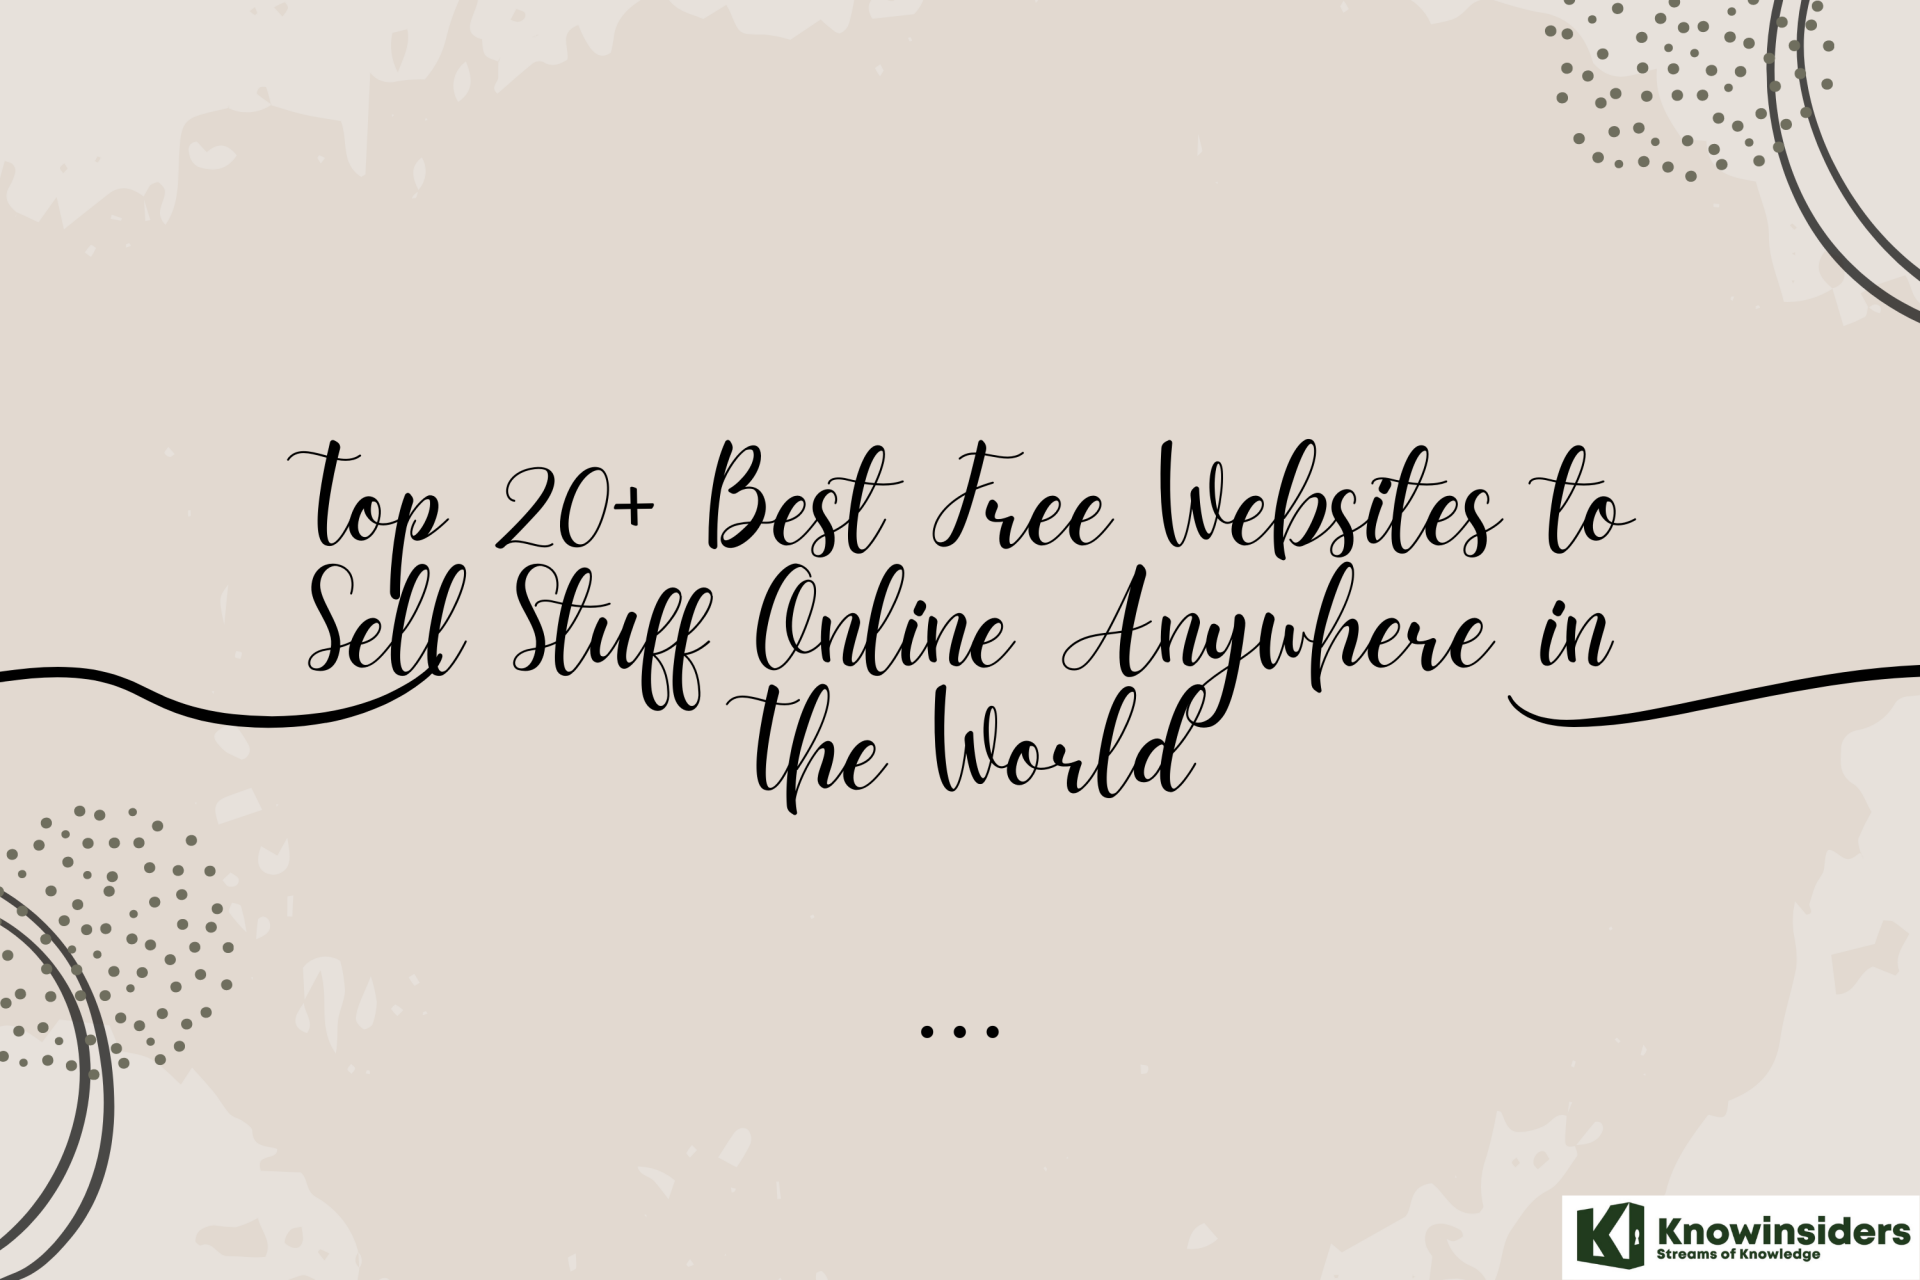 Top 20+ Best Free Websites to Sell Stuff Online Anywhere in The World